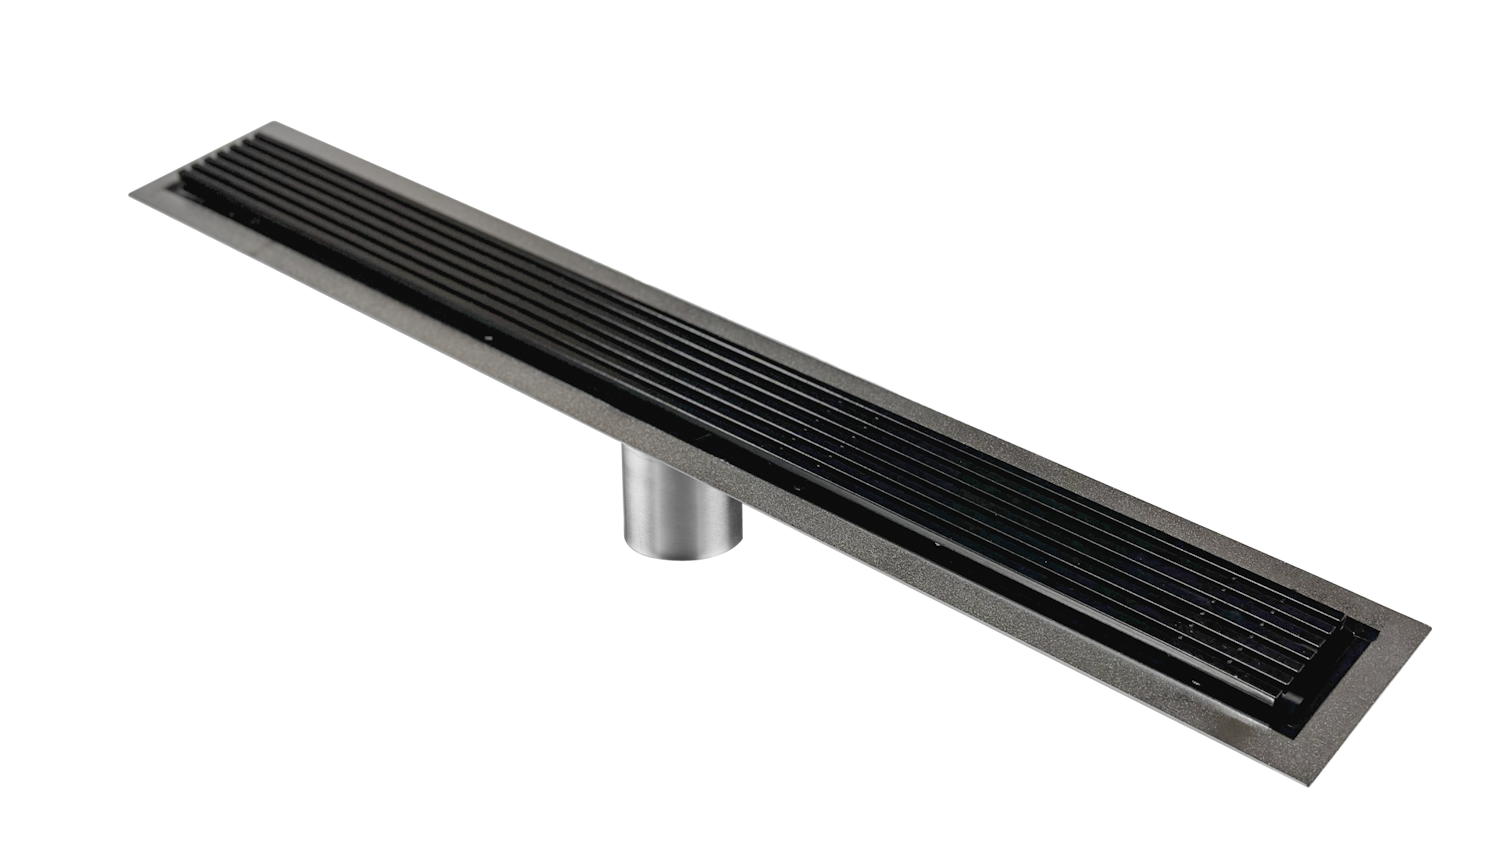 29 Inch Black Linear Shower Drain Wedge Wire Design, Drains Unlimited